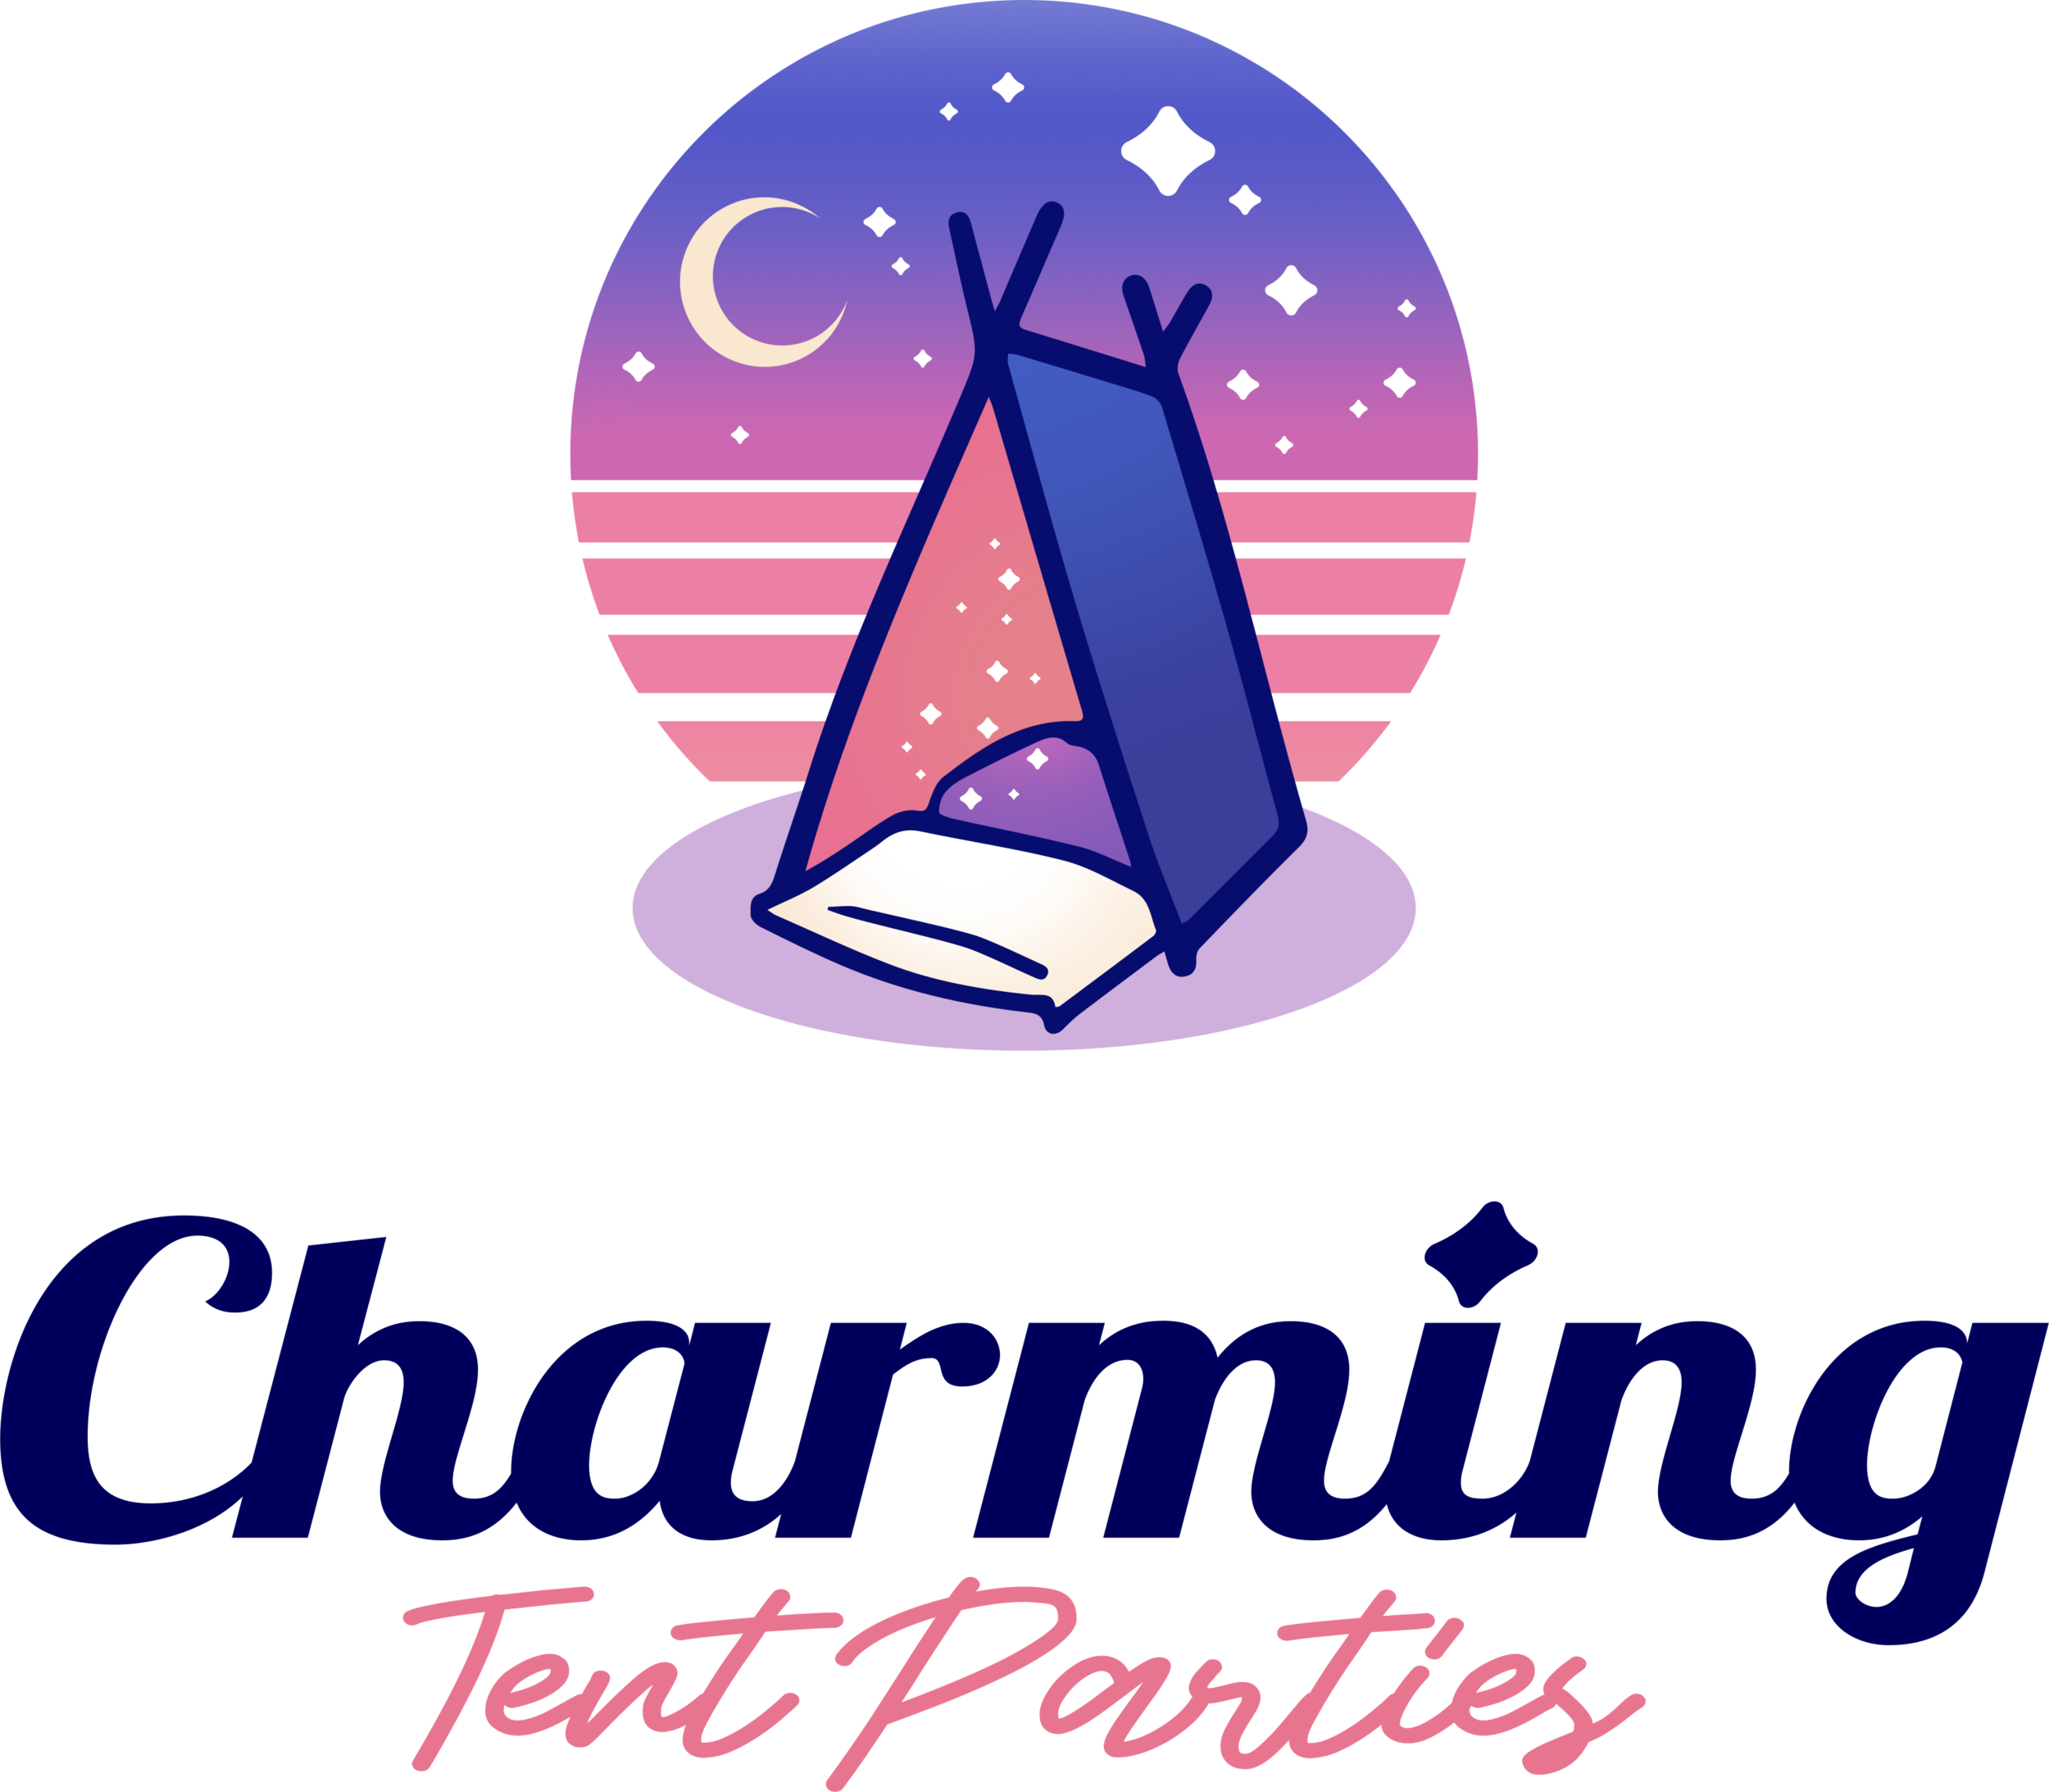 Charming Tent Parties